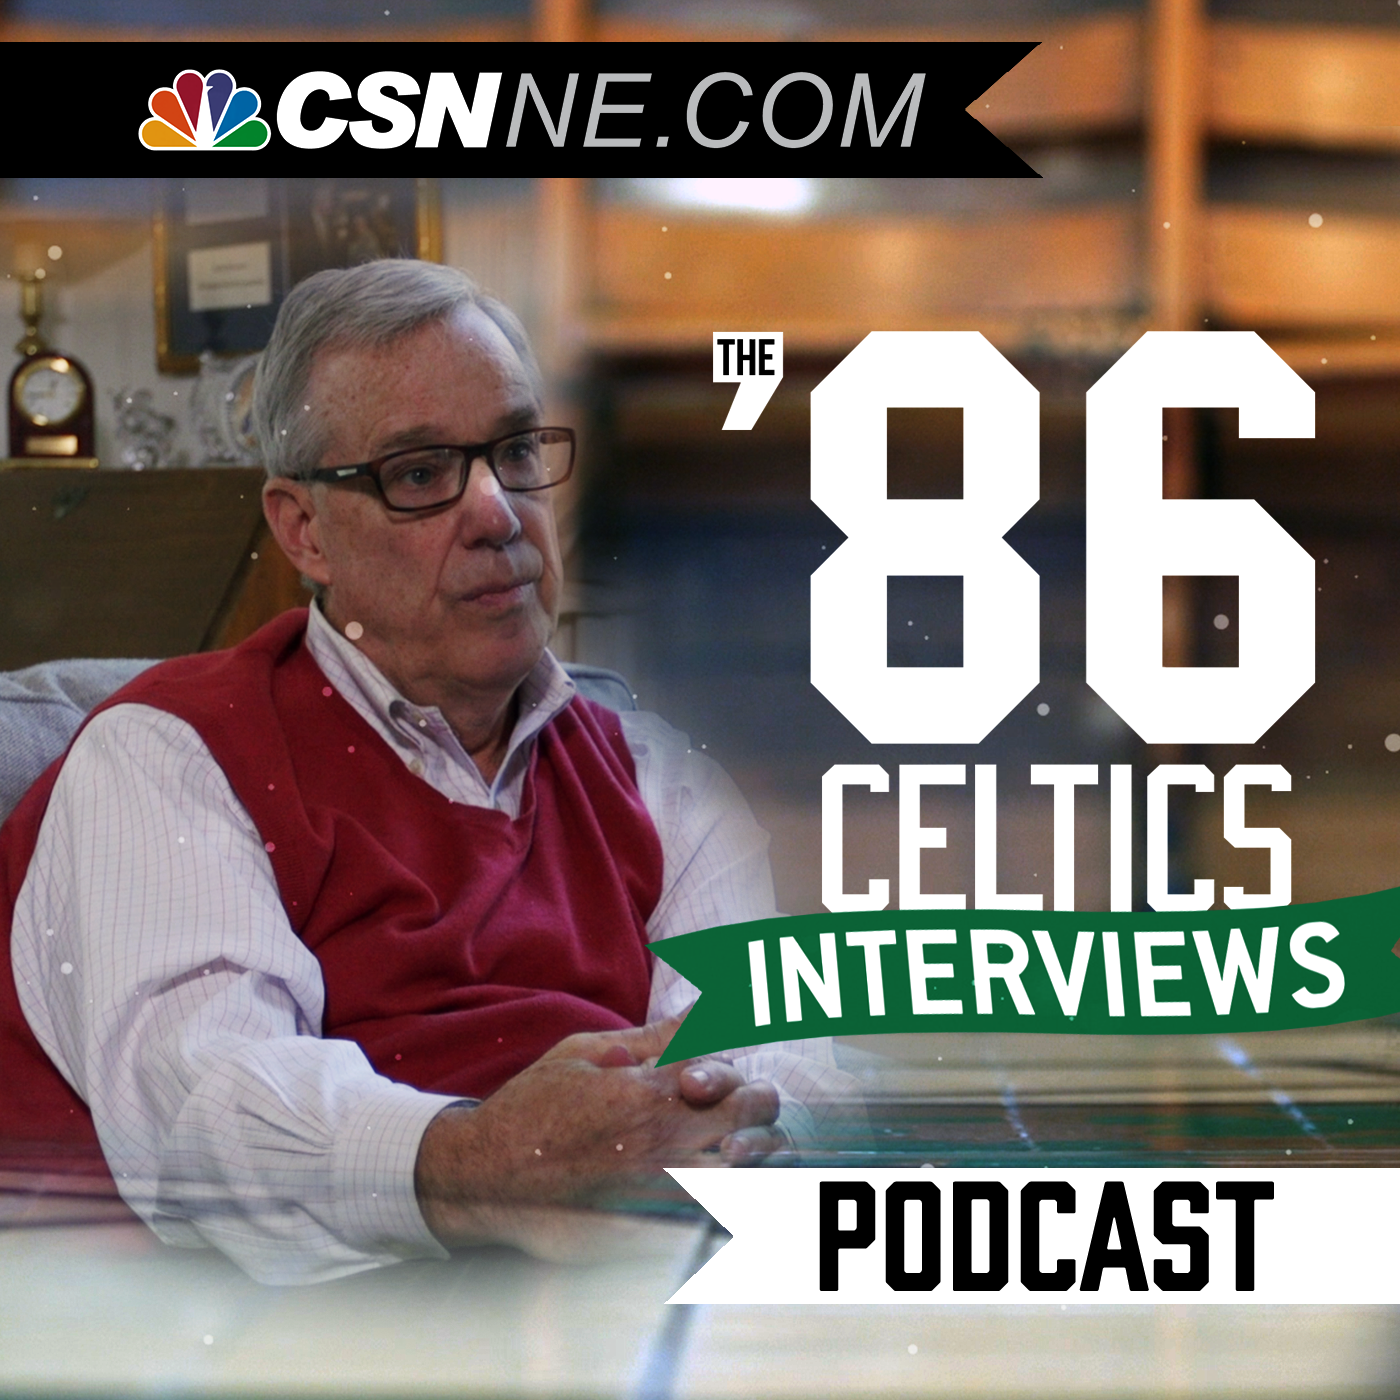 The ’86 Celtics Interviews (Ep. 12): Peter May